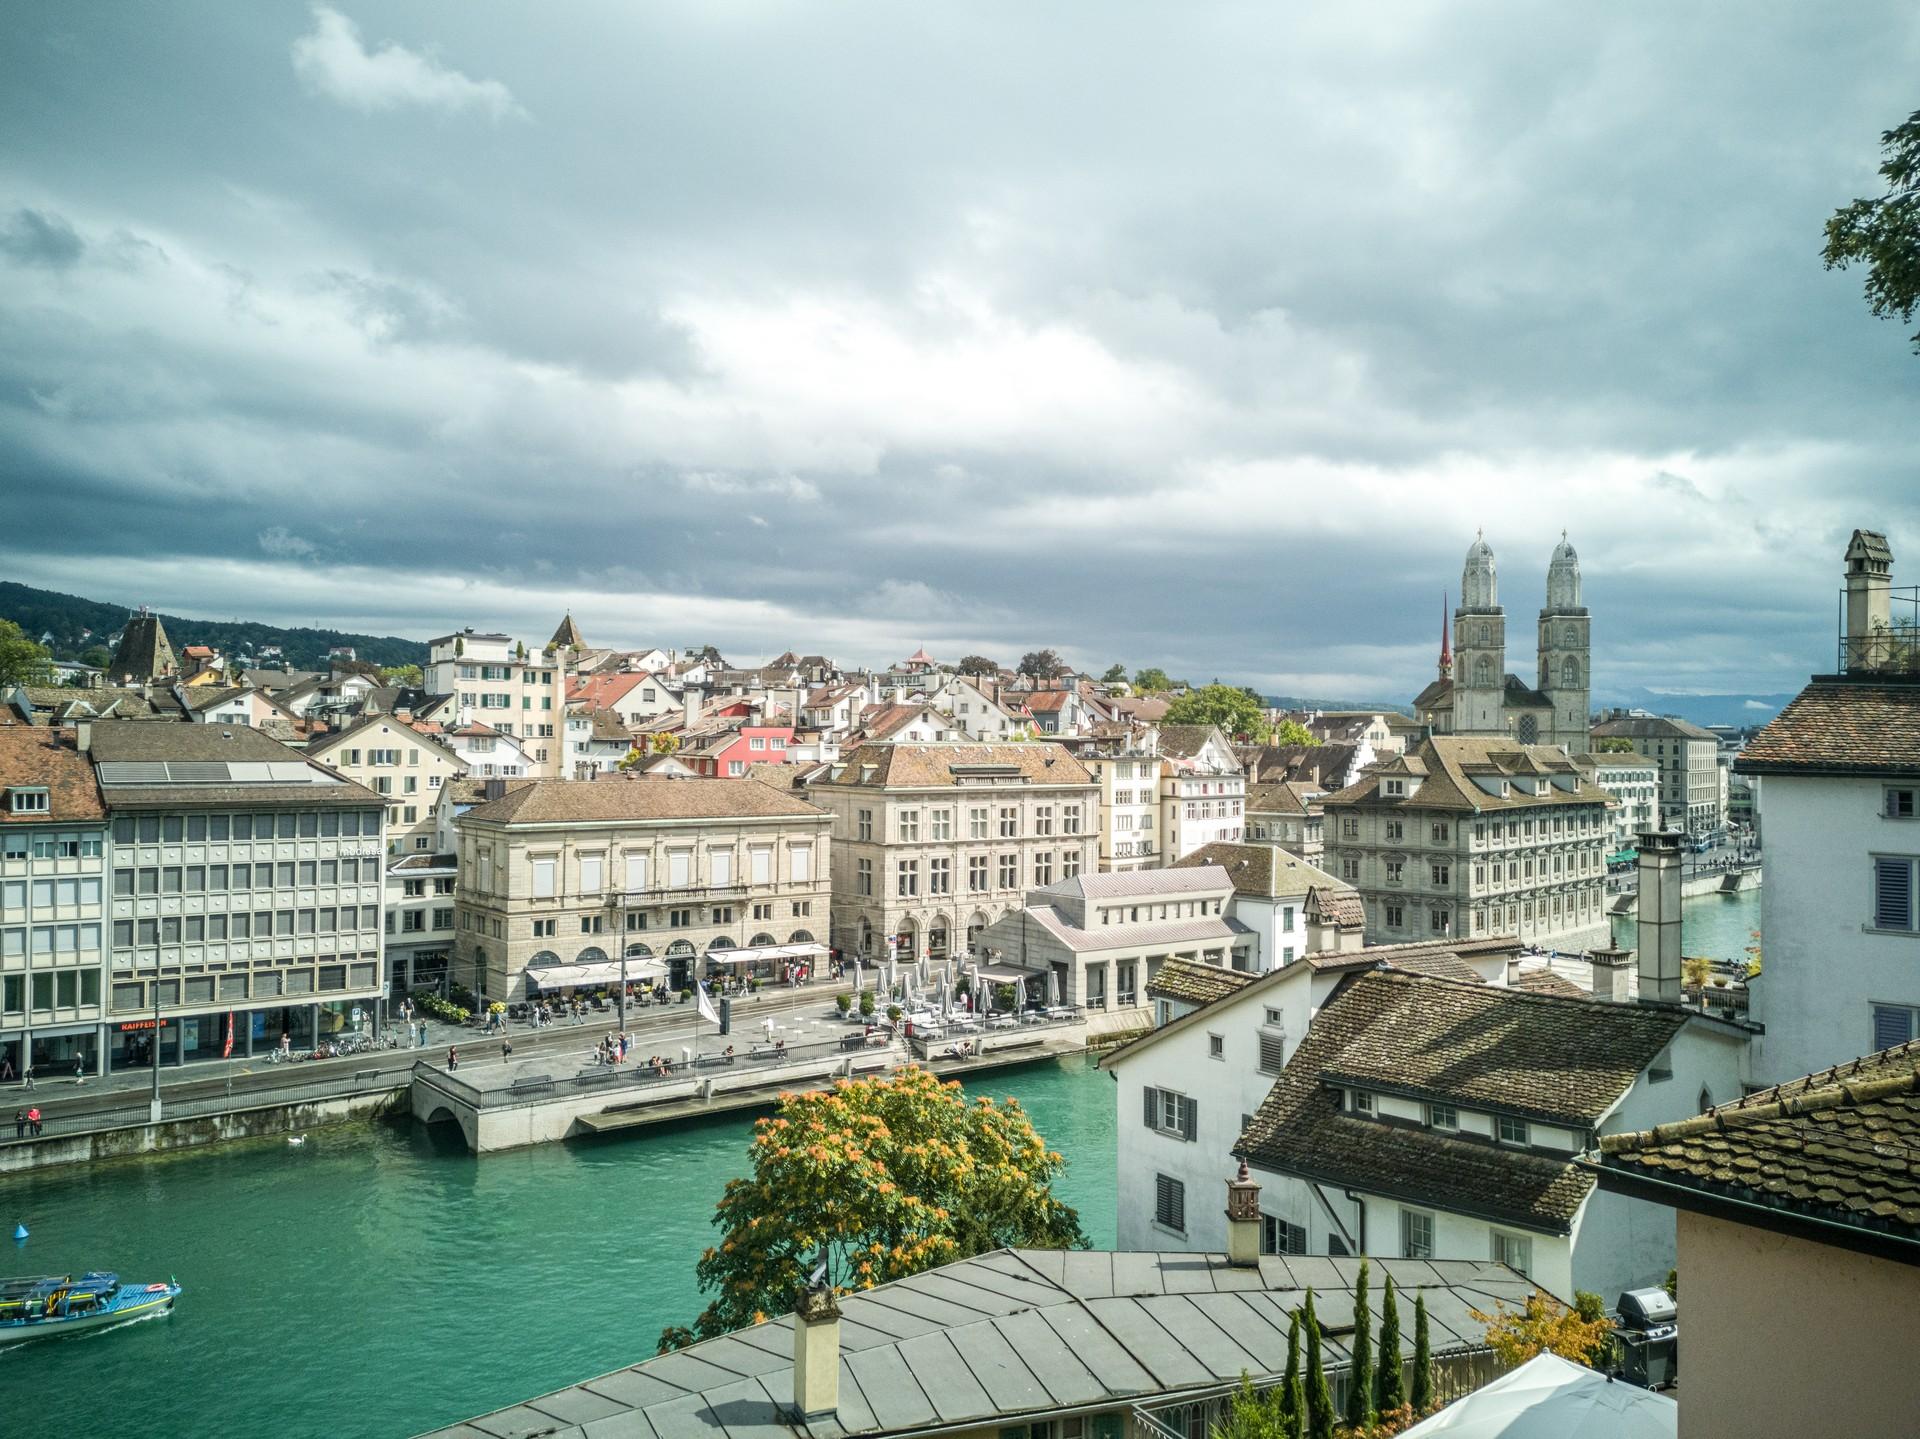 Aerial view of architecture in Zürich on a day with cloudy weather